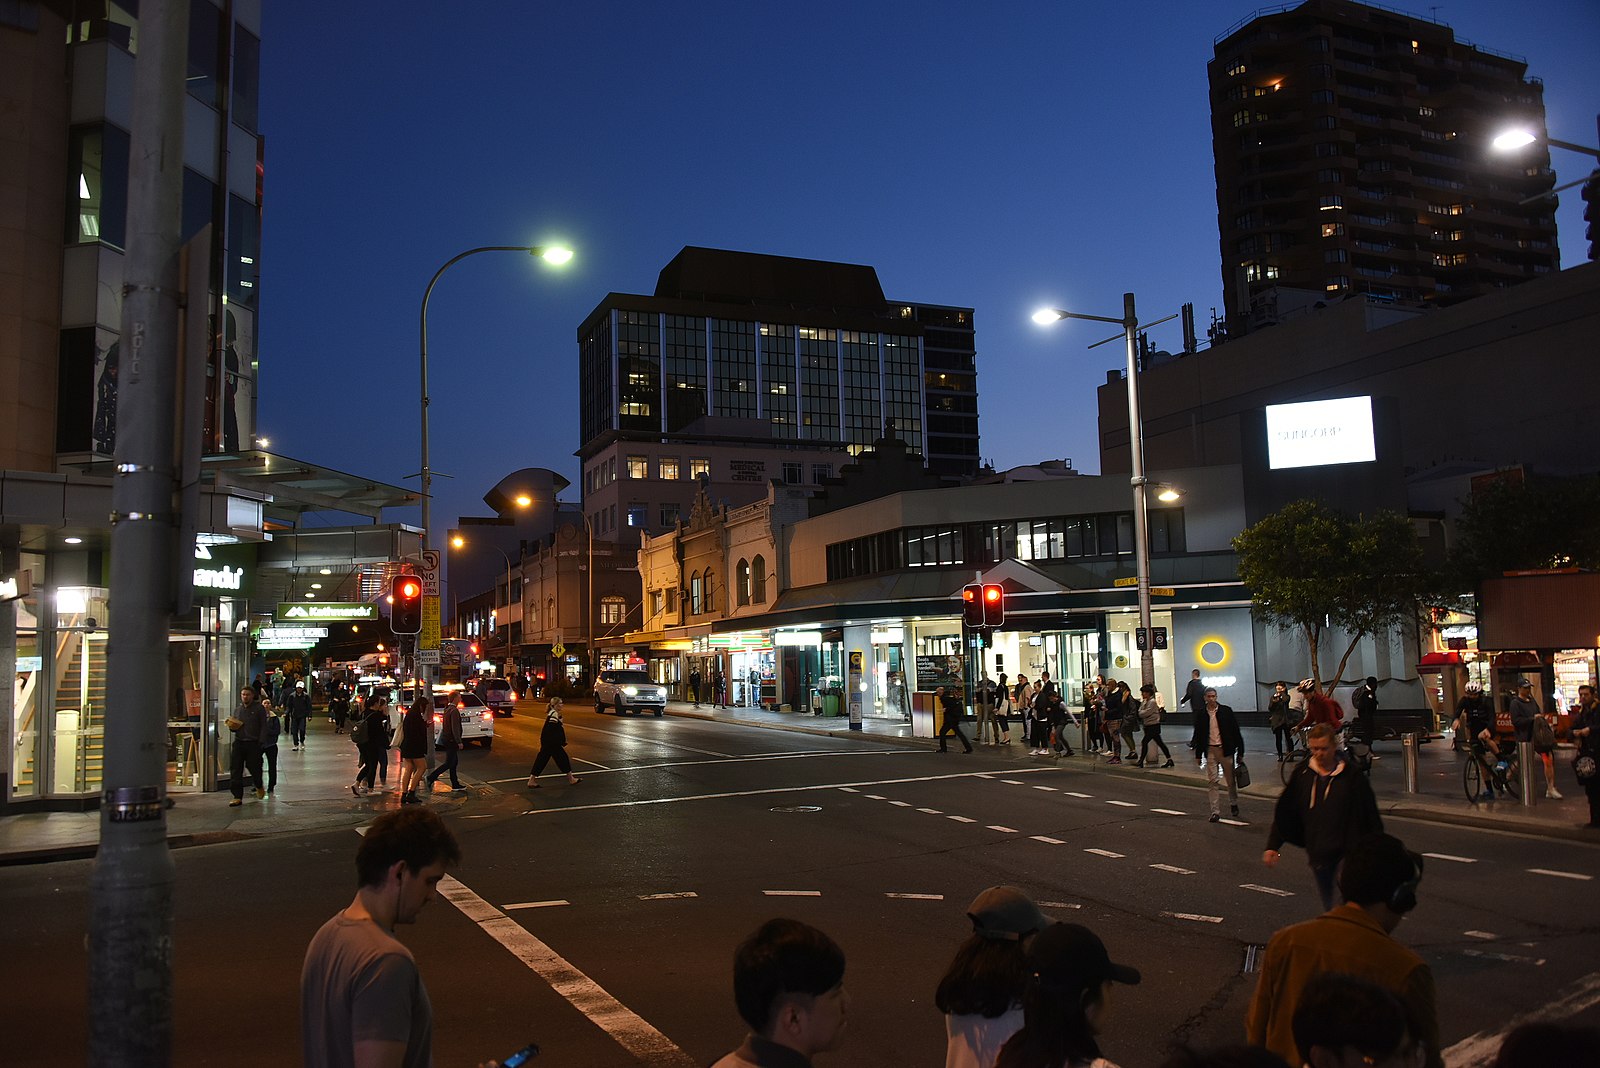 Local council plans to revitalise Bondi Junction with 3am trading